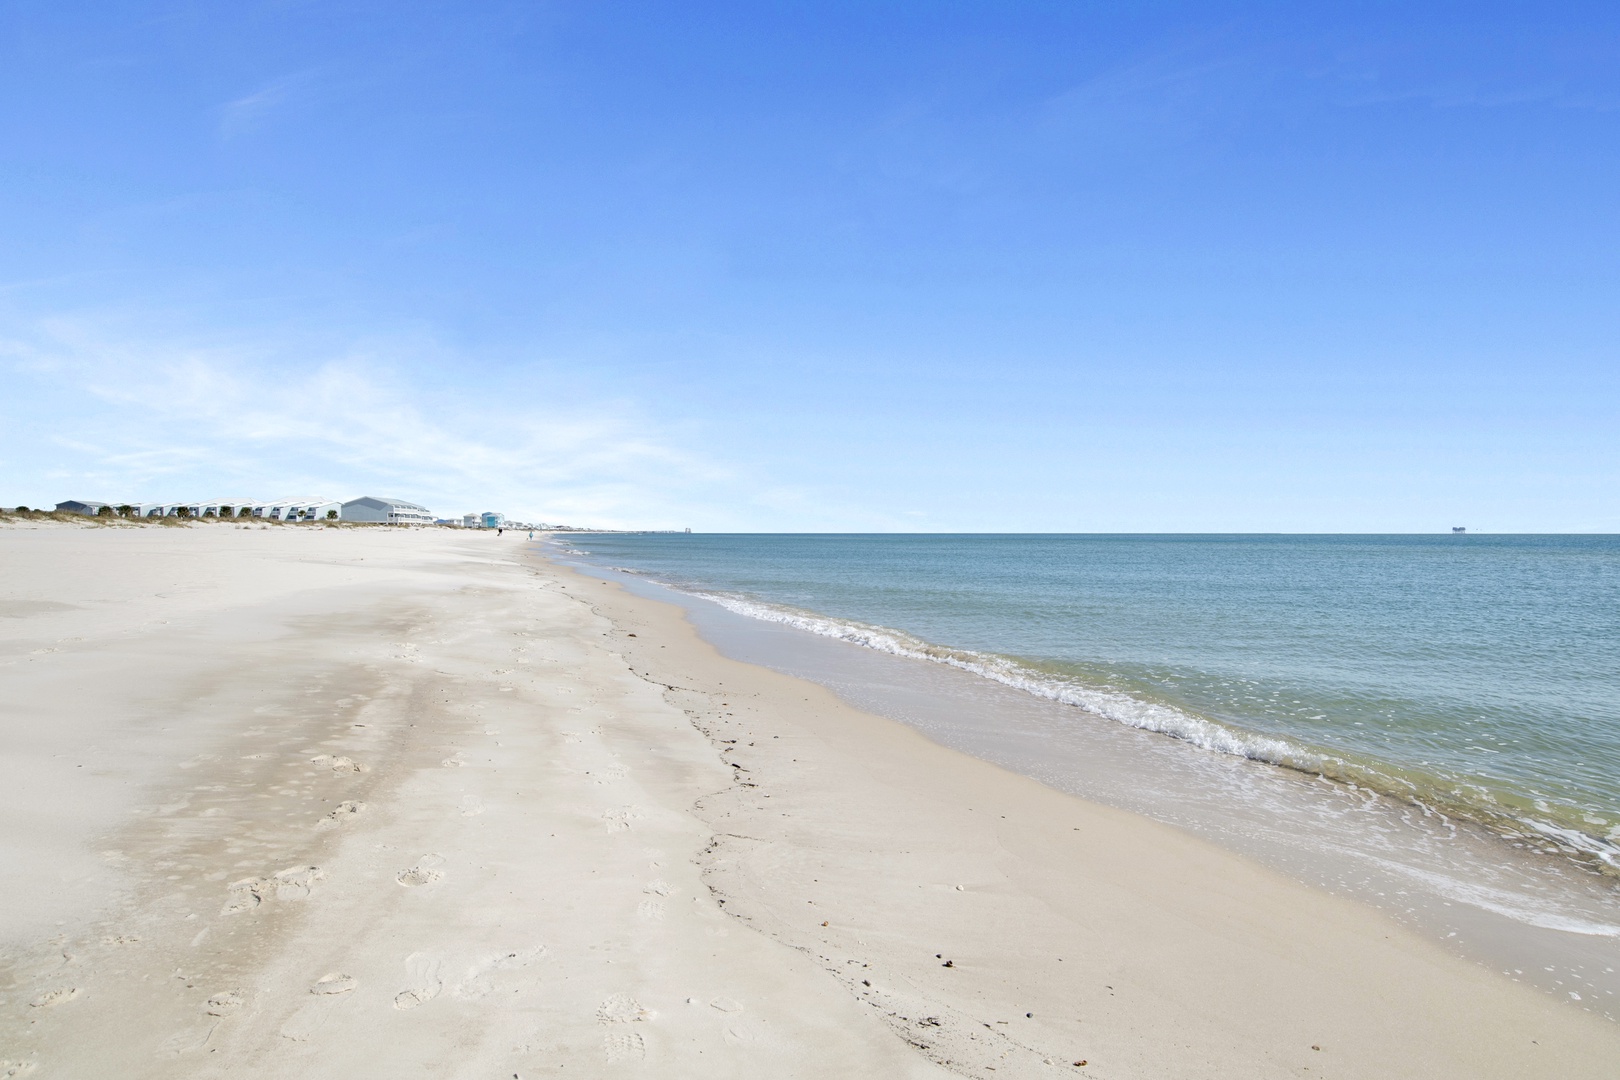 Miles of sand and  the sparkling Gulf of Mexico